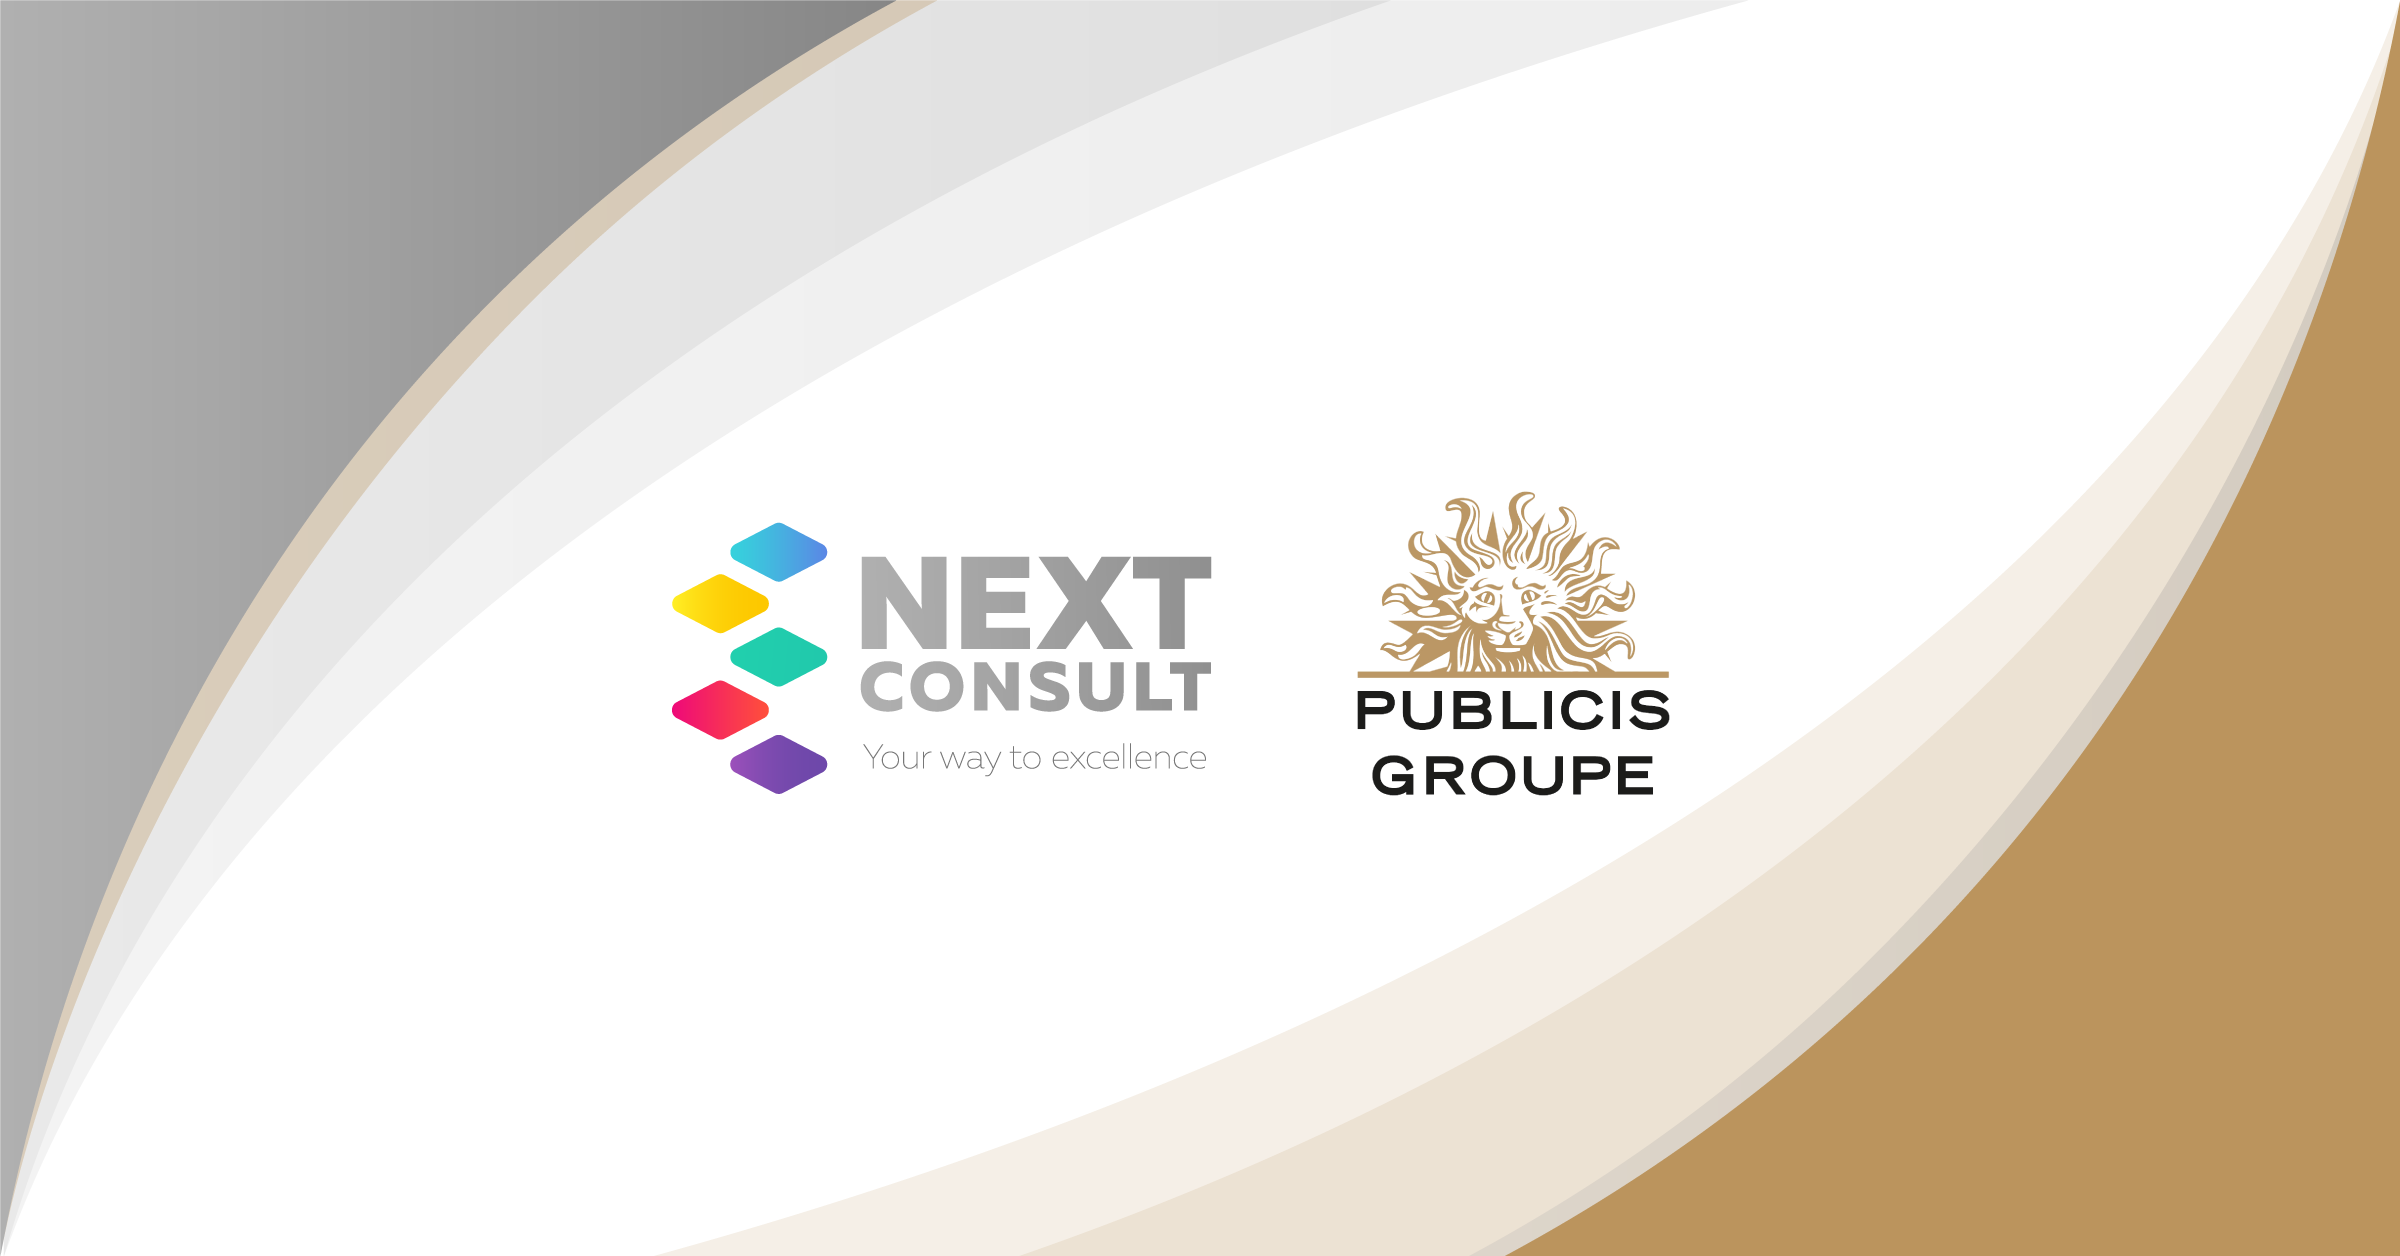 Next Consult and Publicis Groupe Bulgaria will partner on a customer experience management